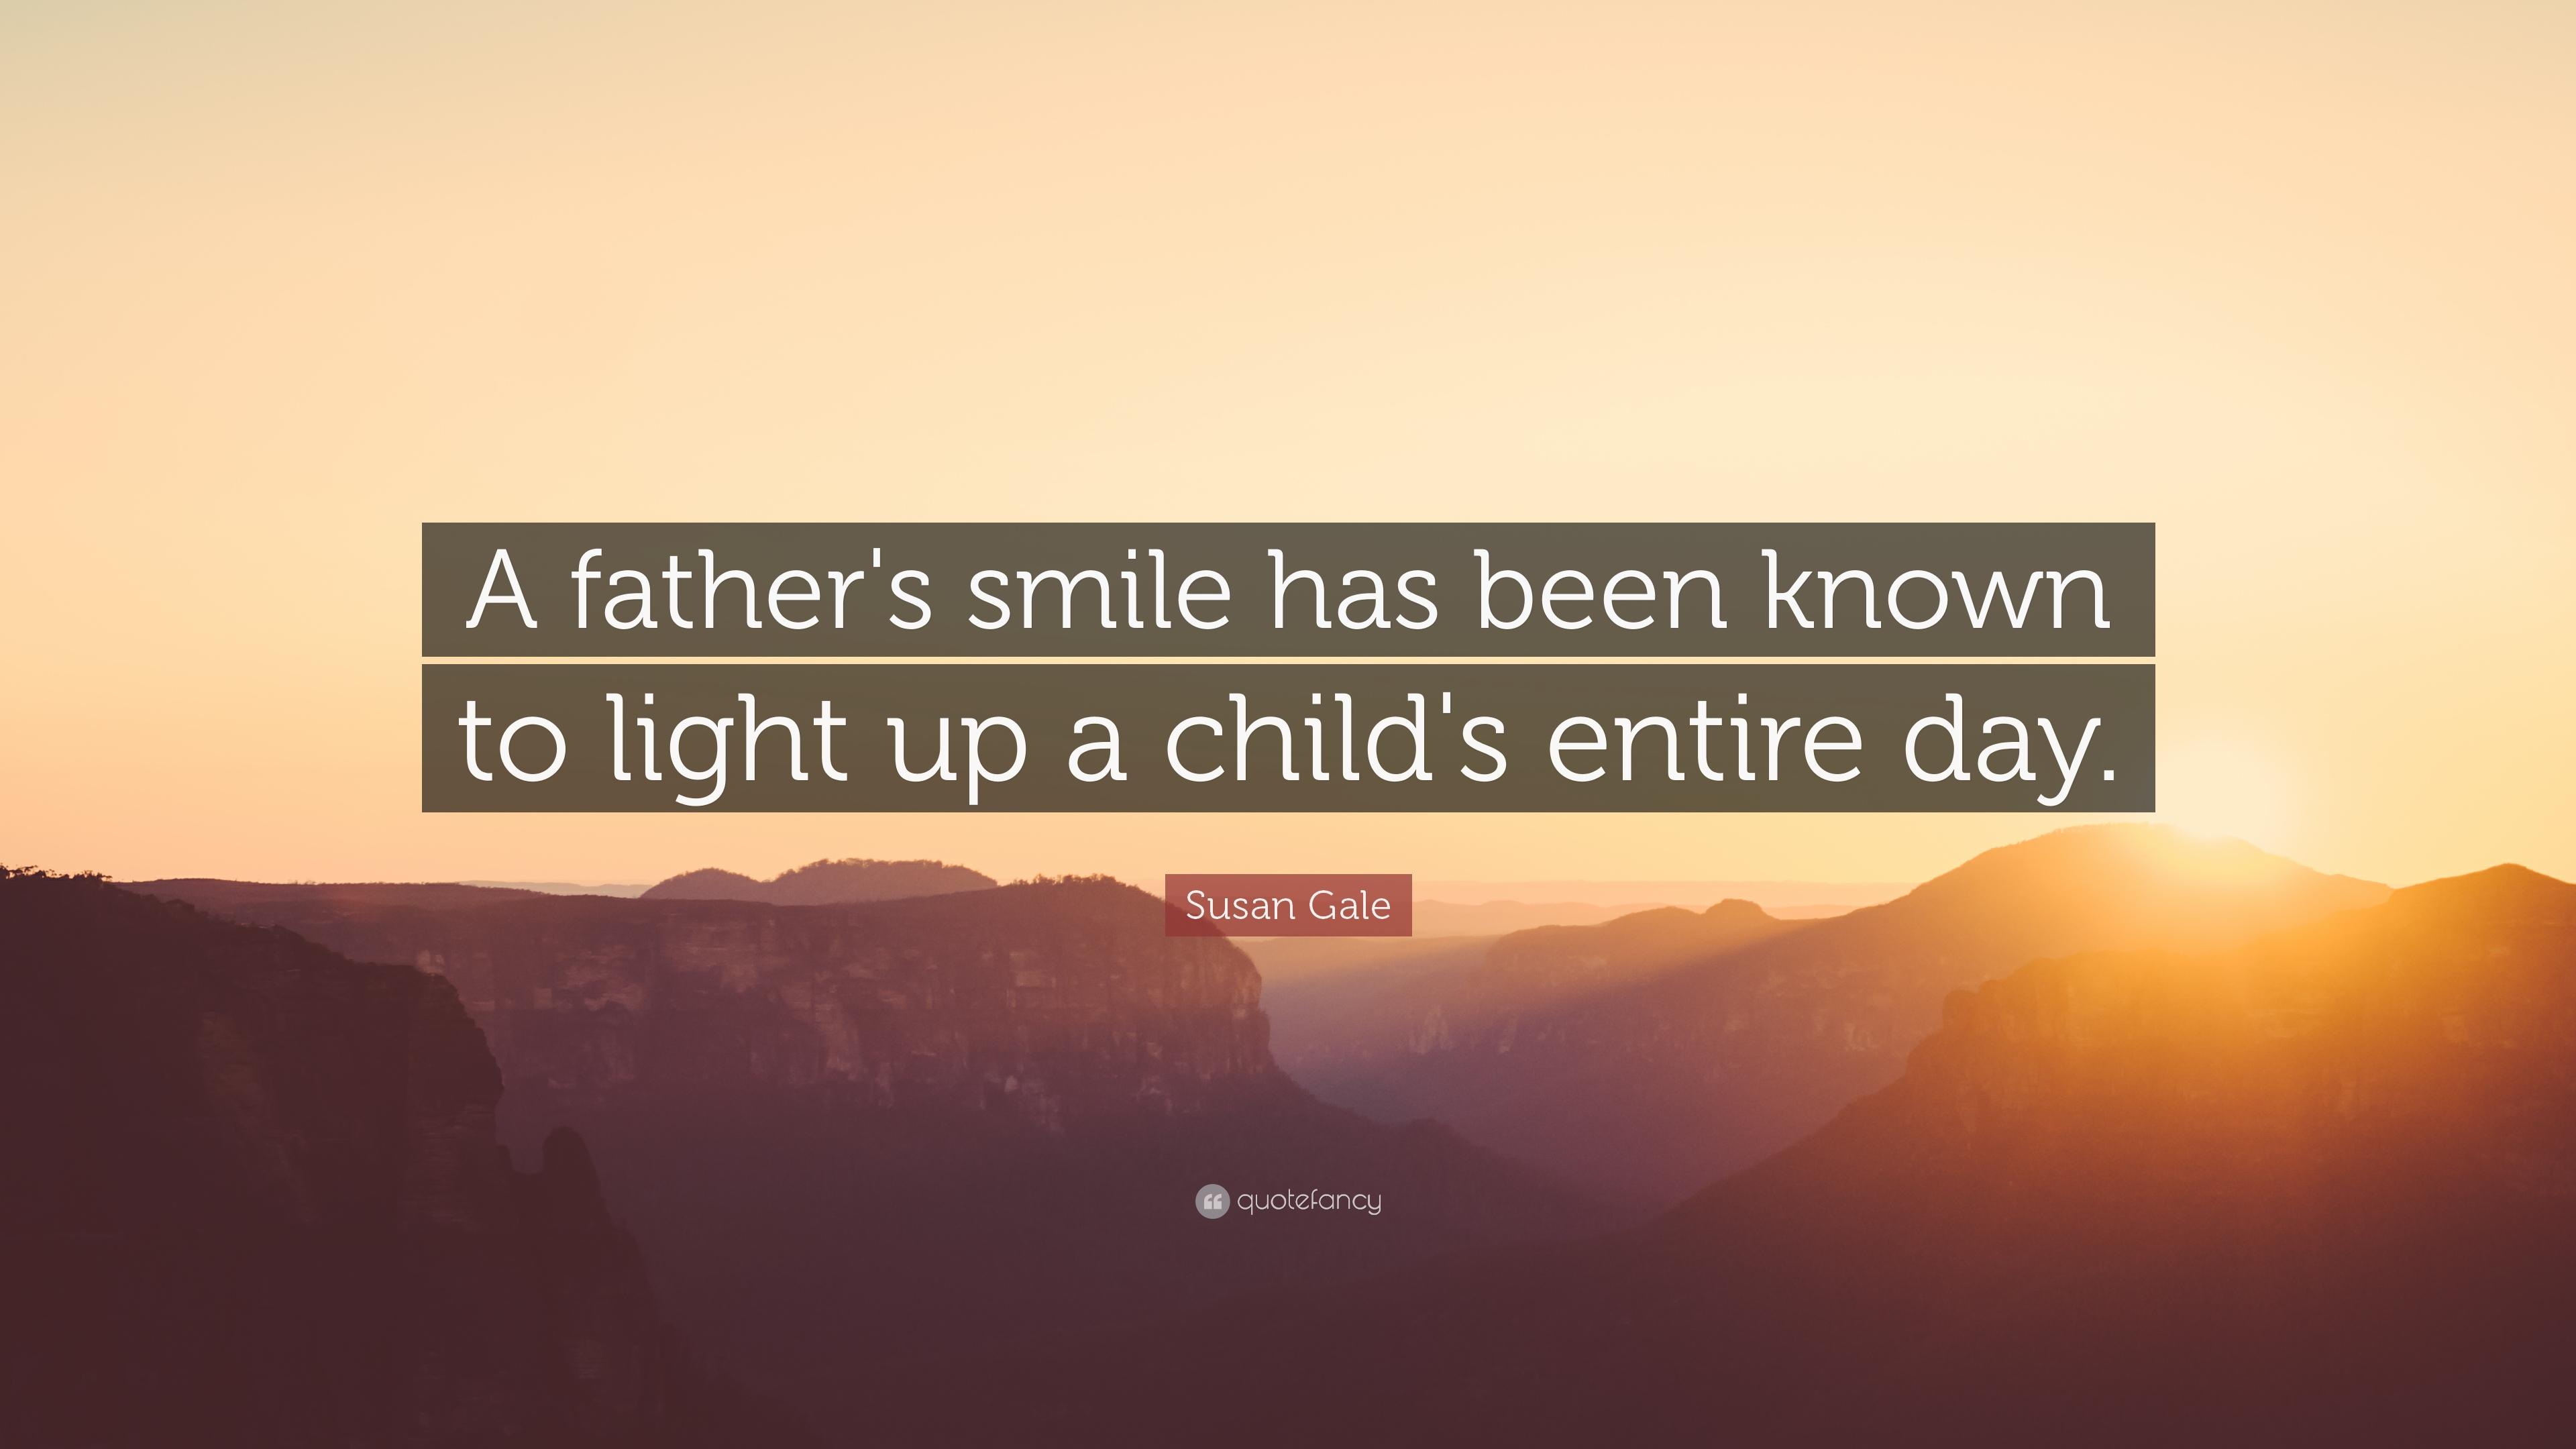 Susan Gale Quote: “A father's smile has been known to light up a